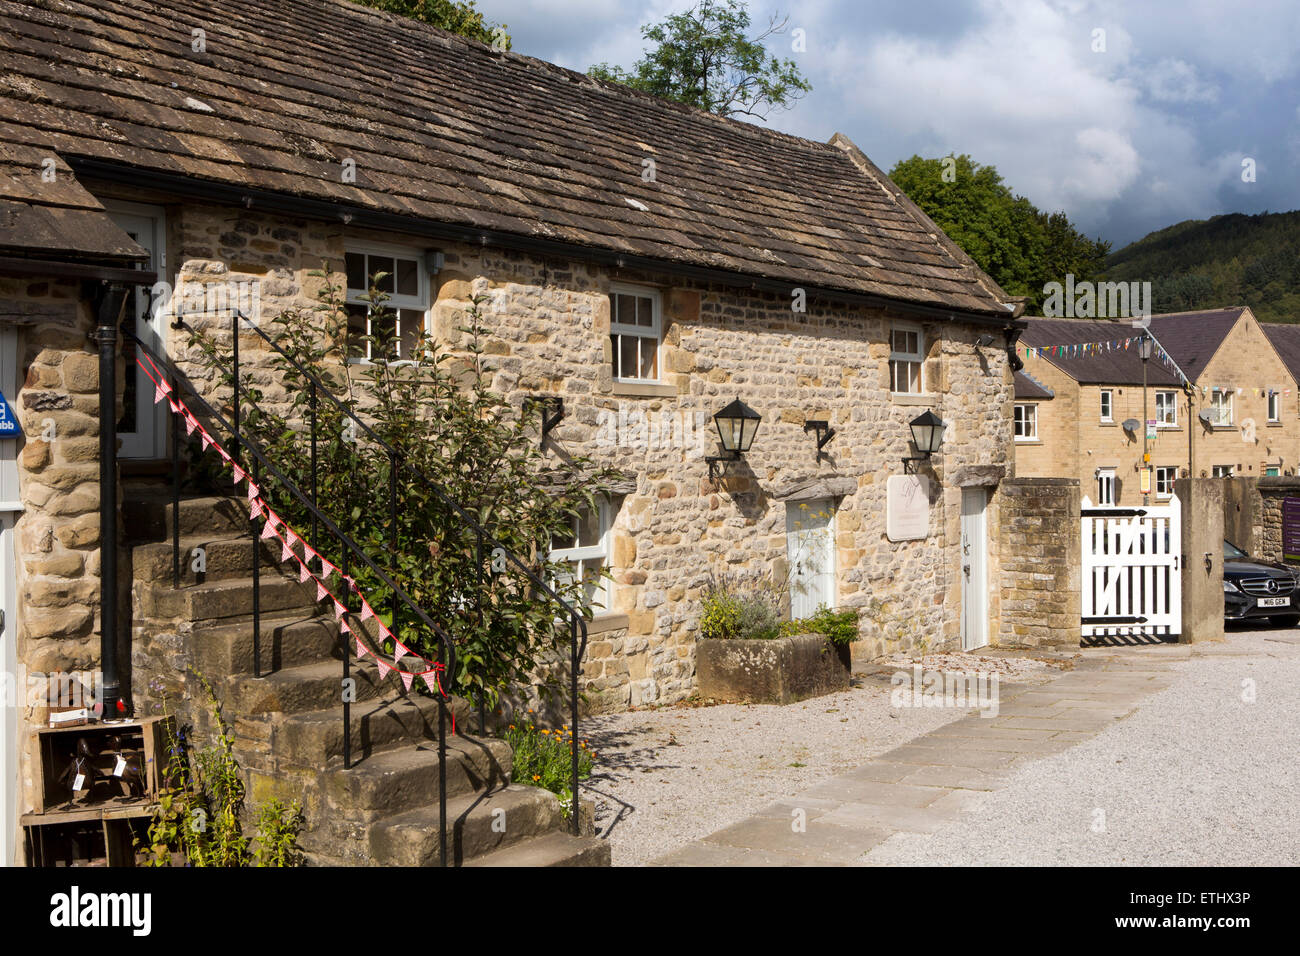 UK, England, Derbyshire, Eyam, Hall courtyard, old stone barns used as craft workshops and offices Stock Photo